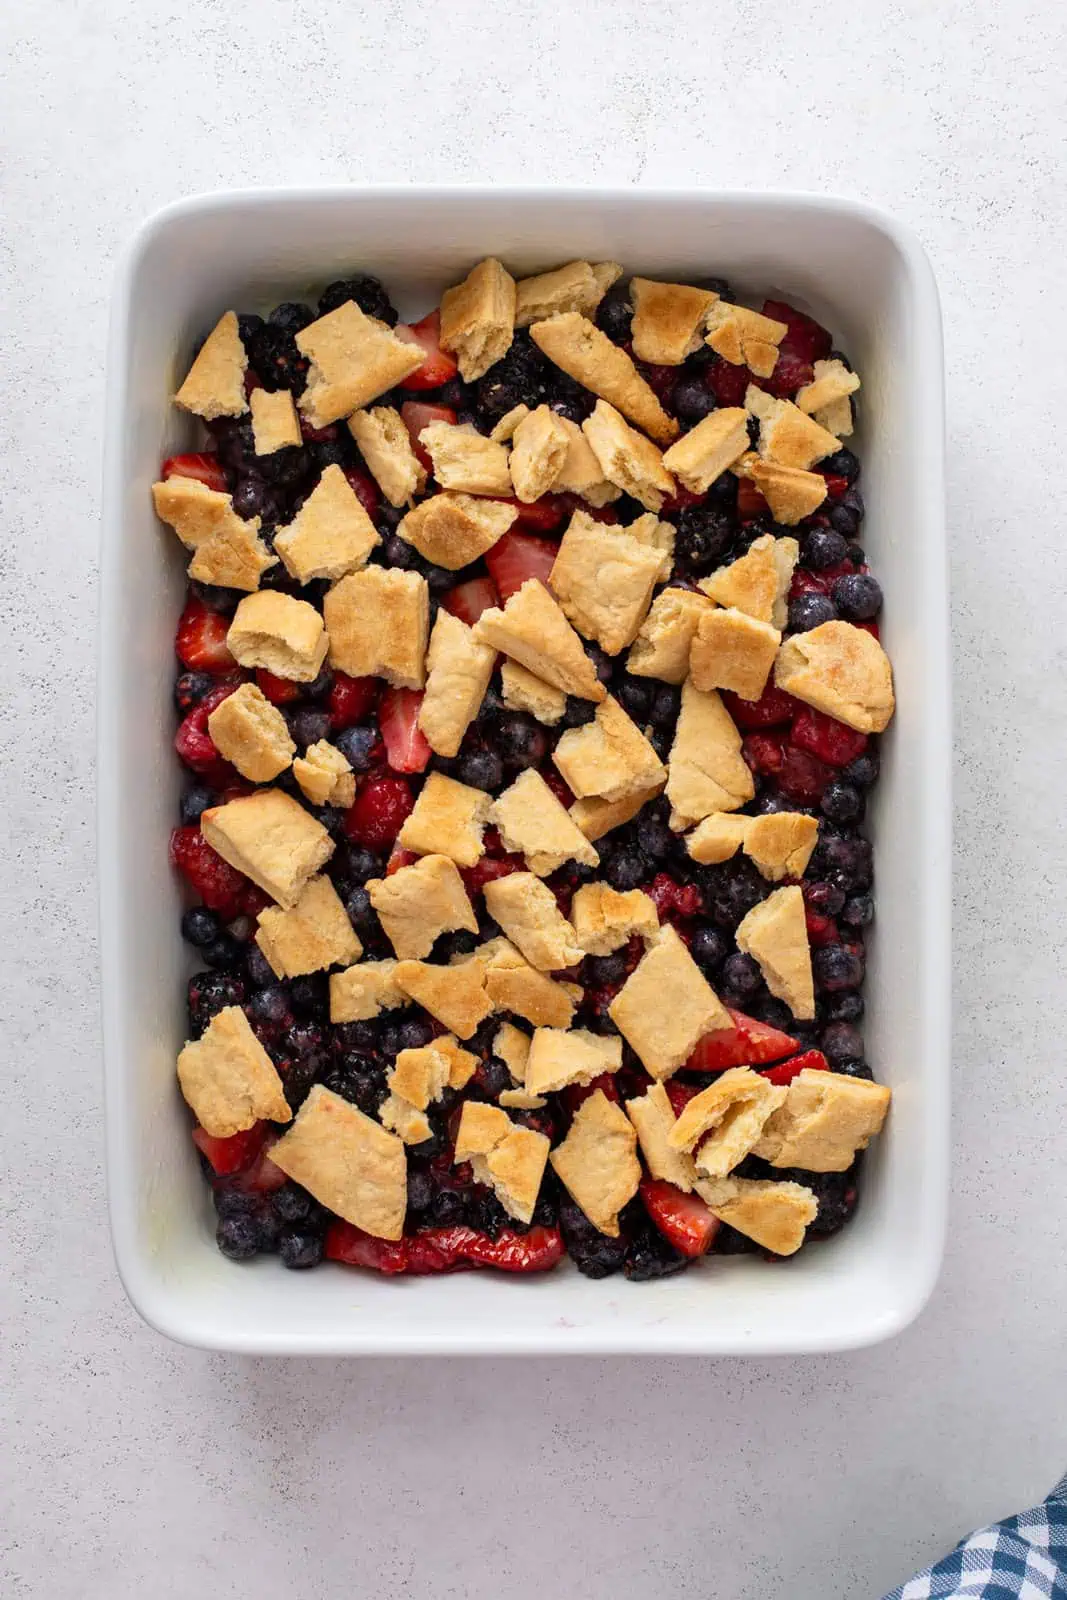 Layer of mixed berry cobbler filling in a baking dish, topped with pieces of baked pastry dough.